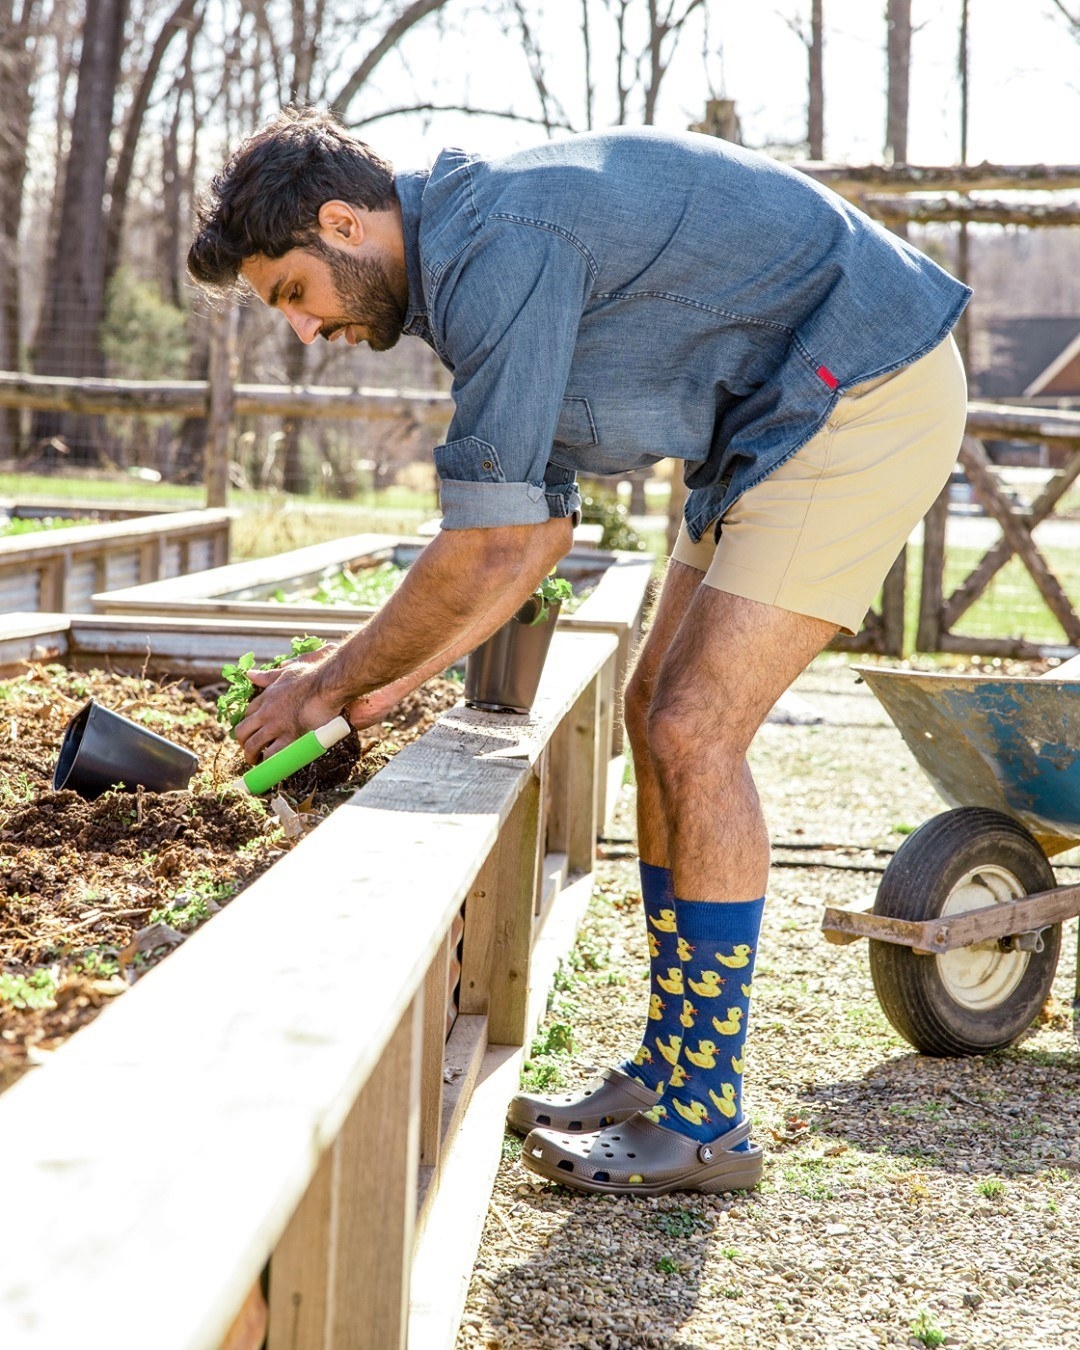 A person gardening while wearing the socks with Crocs